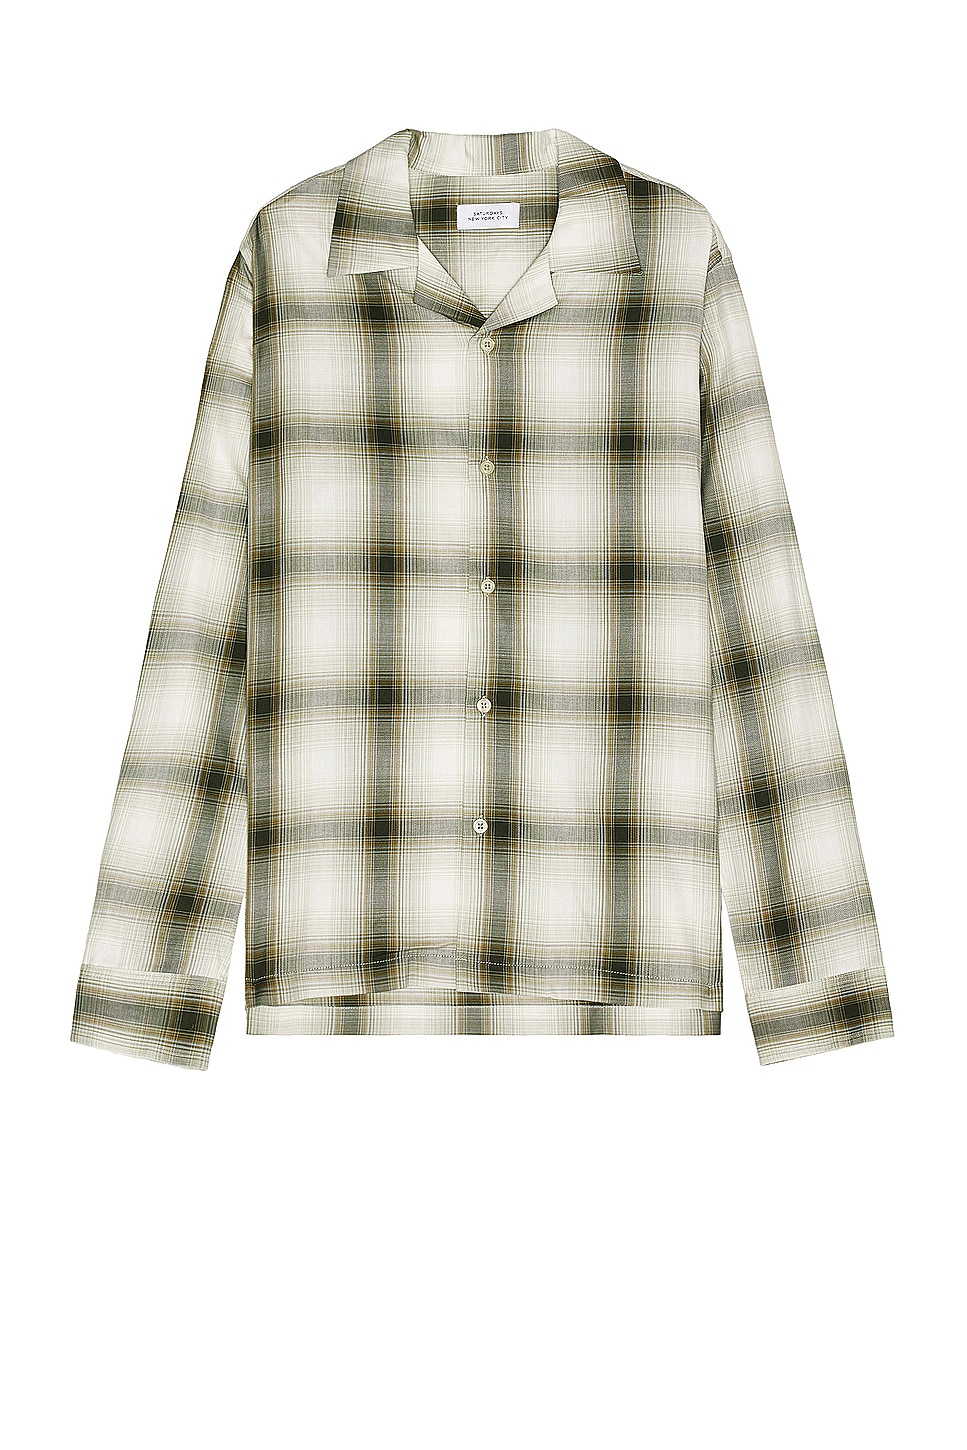 Image 1 of SATURDAYS NYC Marco Plaid Long Sleeve Shirt in Dark Forest